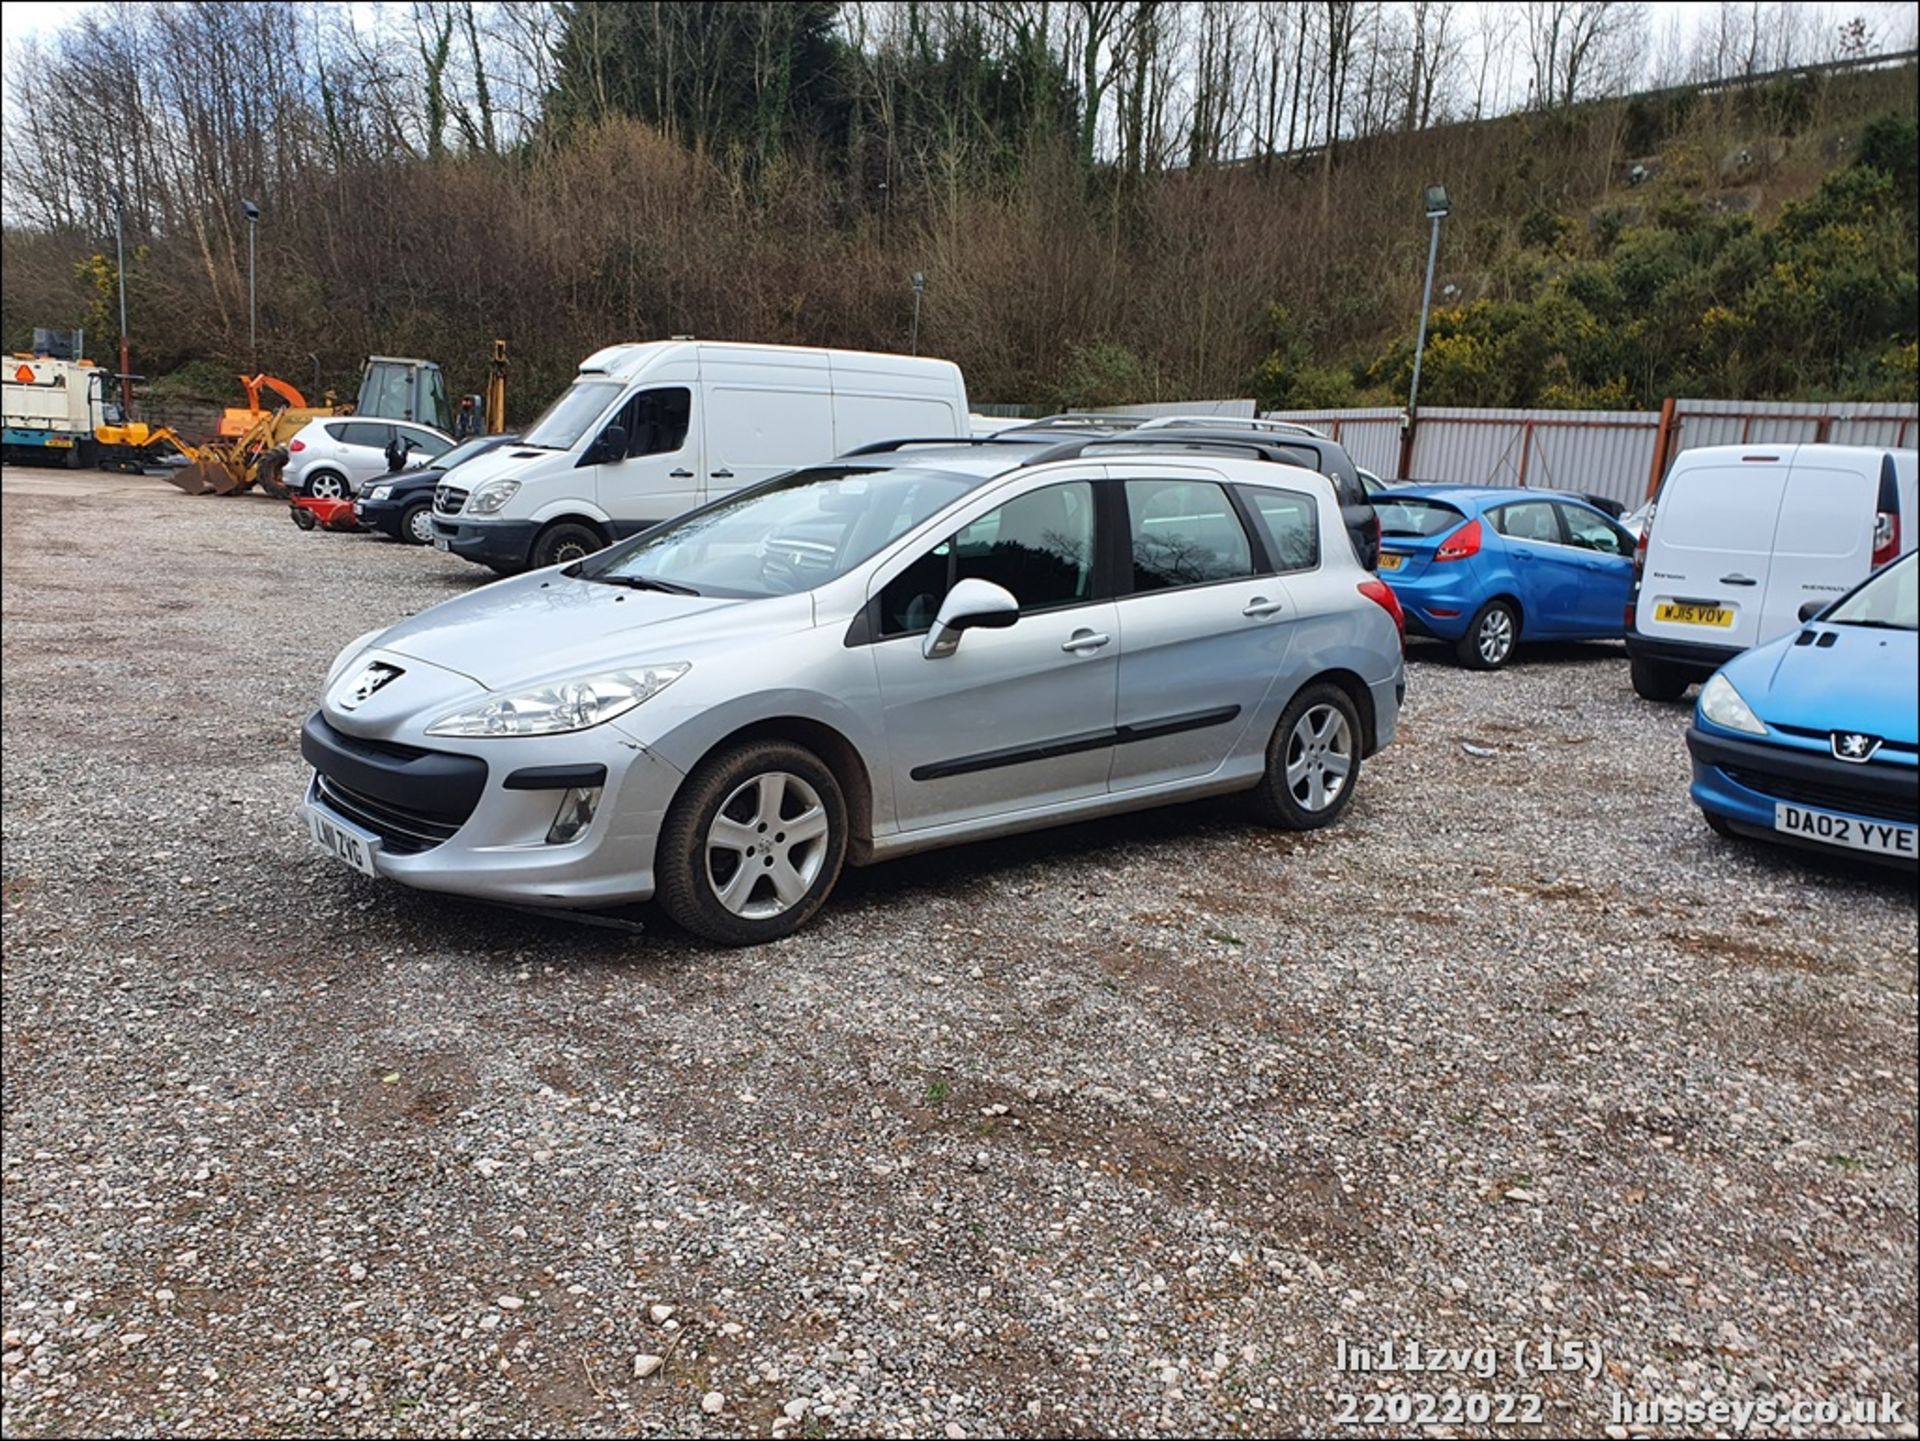 11/11 PEUGEOT 308 S SW HDI 92 - 1560cc 5dr Estate (Silver, 115k) - Image 15 of 46